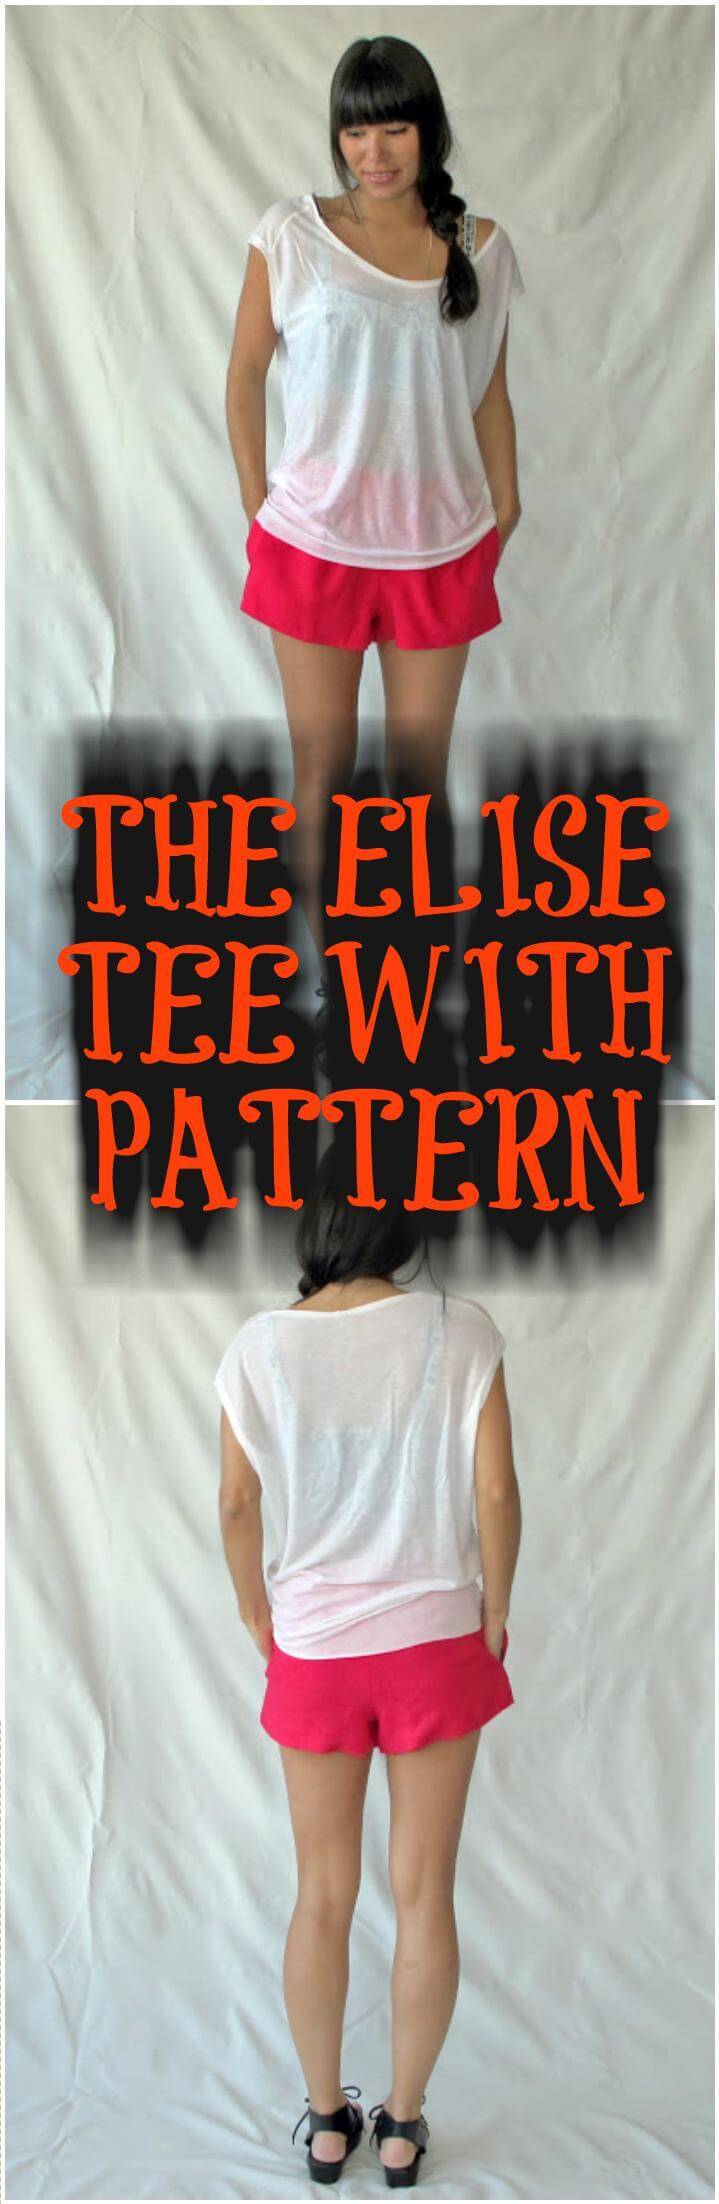 special the Else tee with pattern